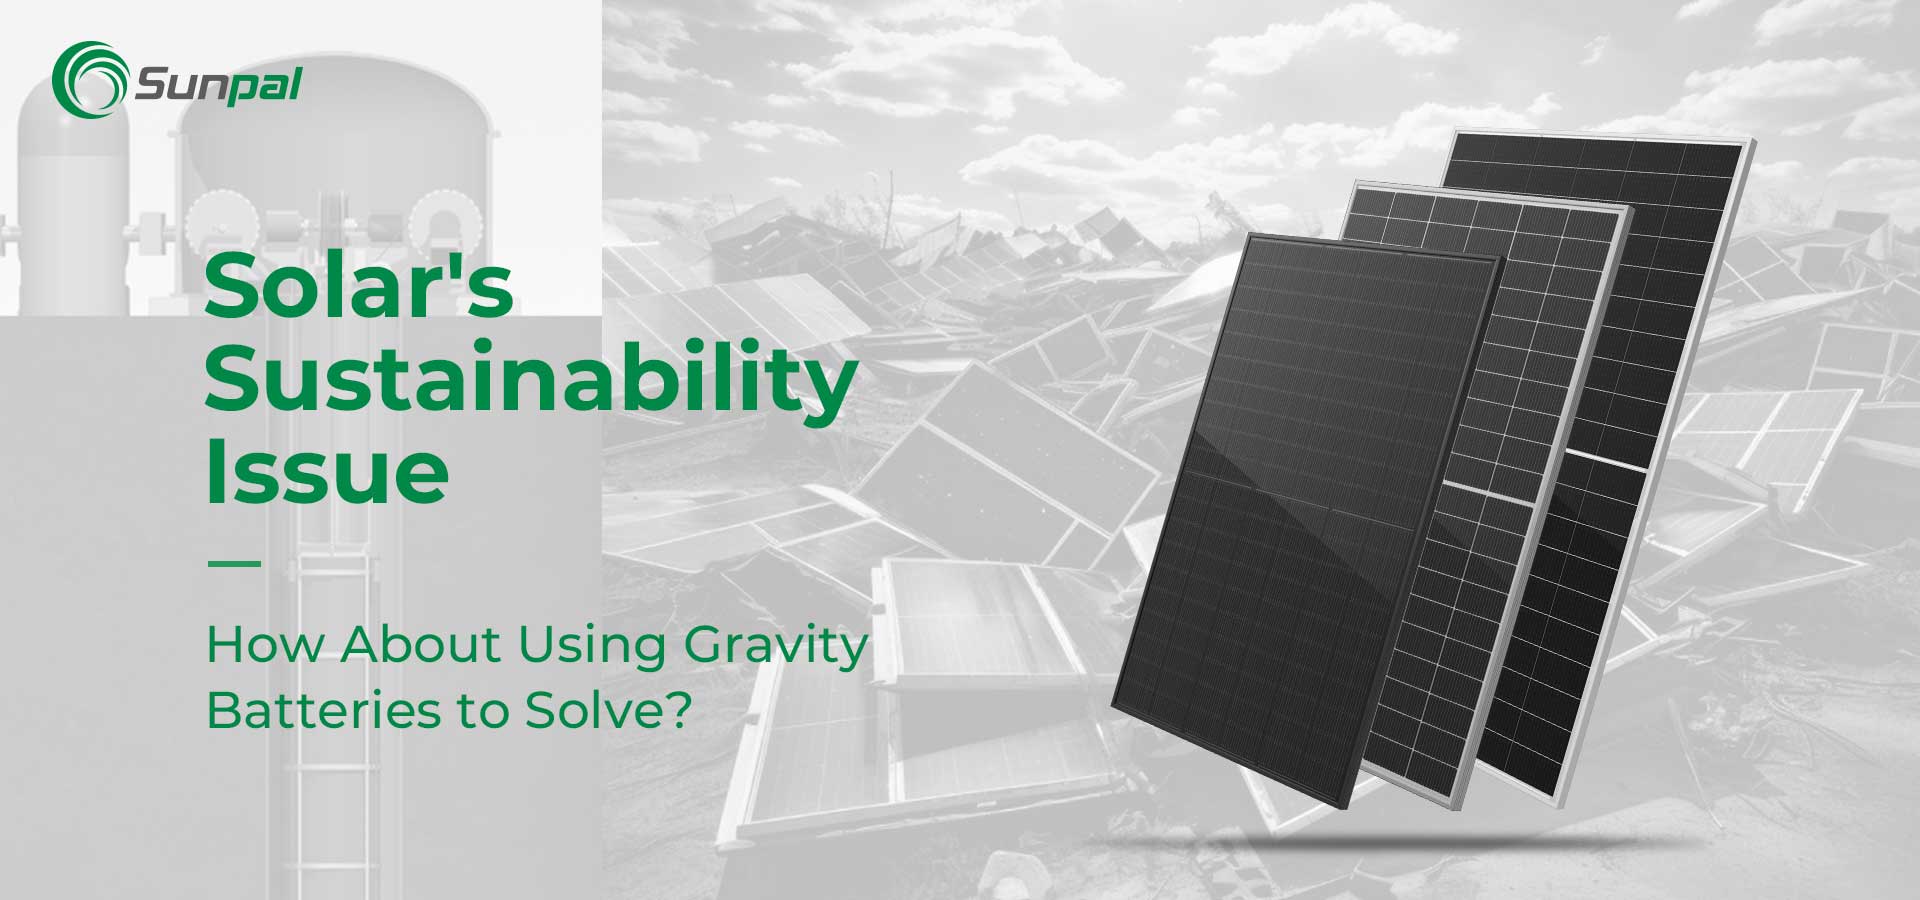 Solar's Sustainability Issue | Use Gravity Batteries To Cope?